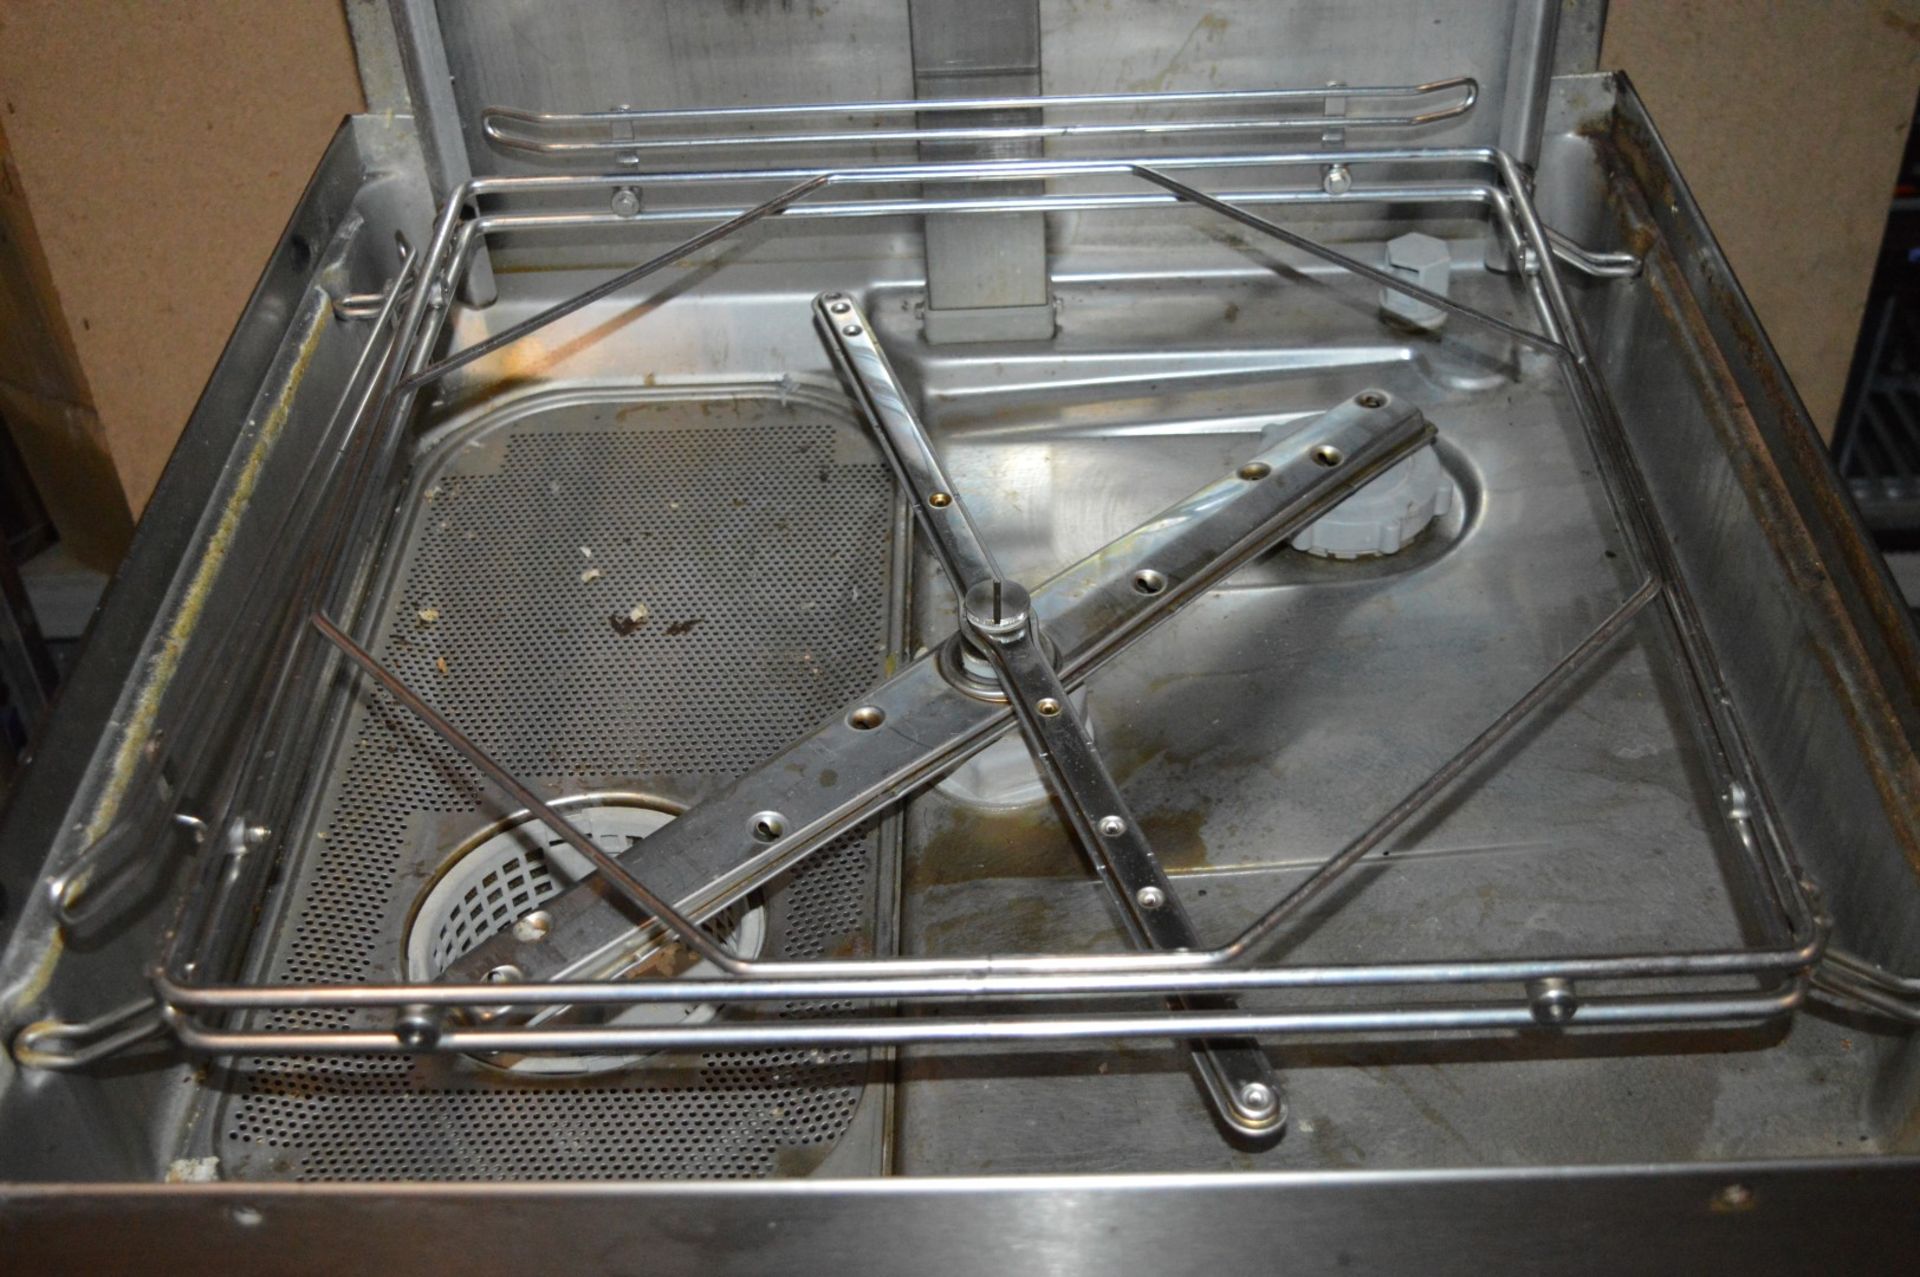 1 x Hobart AMXS-16 Pass Through Dish Washer - Year 2014 - First Installed October 2014 - Stainless - Image 9 of 12